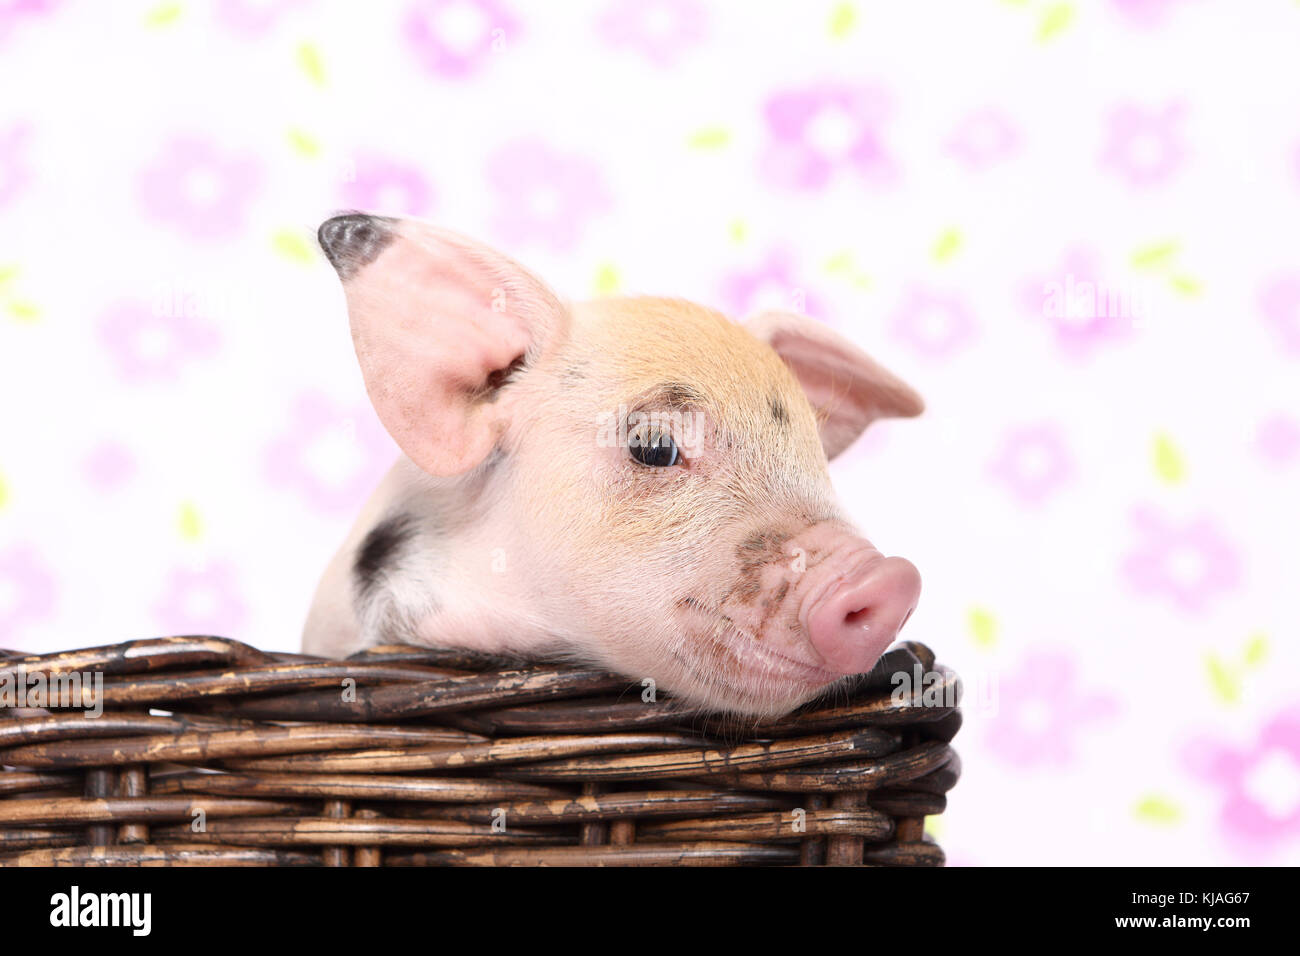 Domestic Pig, Turopolje x ?. Piglet in a basket. Studio picture seen against a white background with flower print. Germany Stock Photo